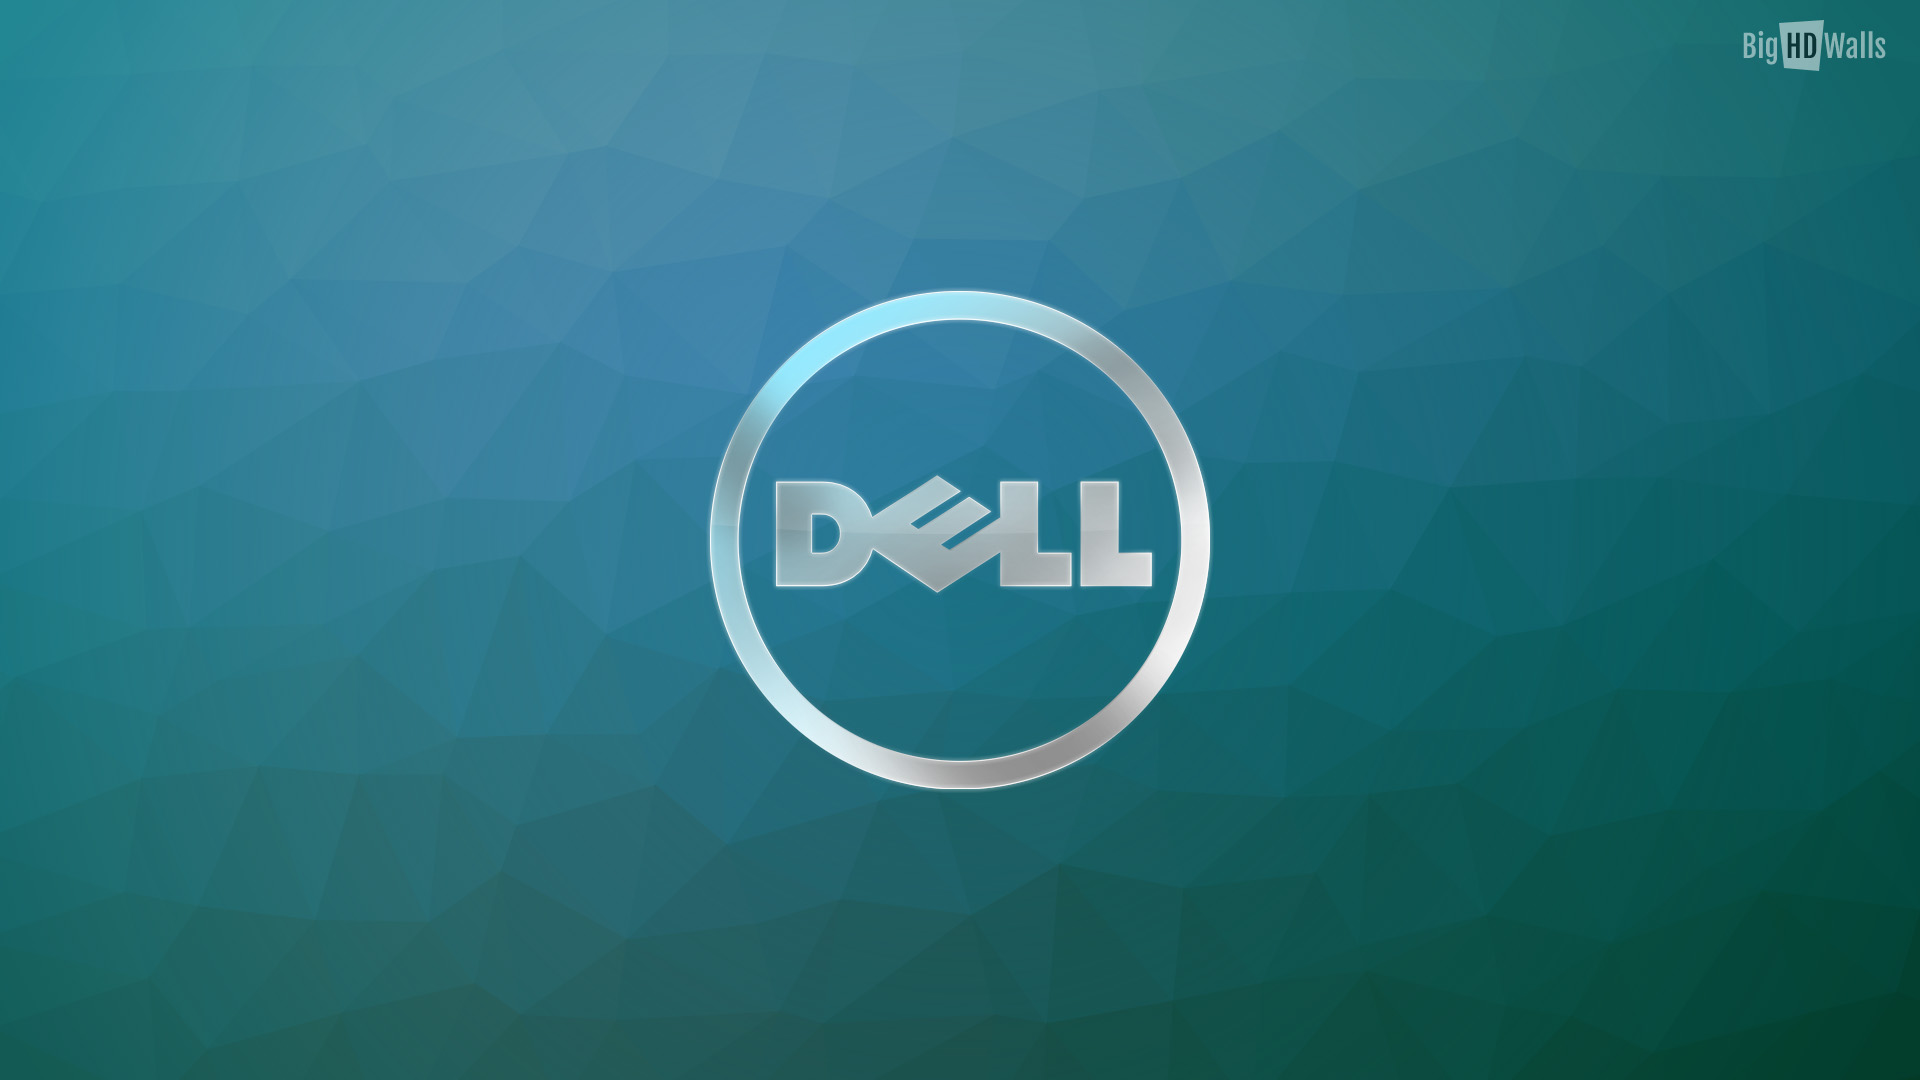 Dell Xps Wallpaper Windows Image In Collection